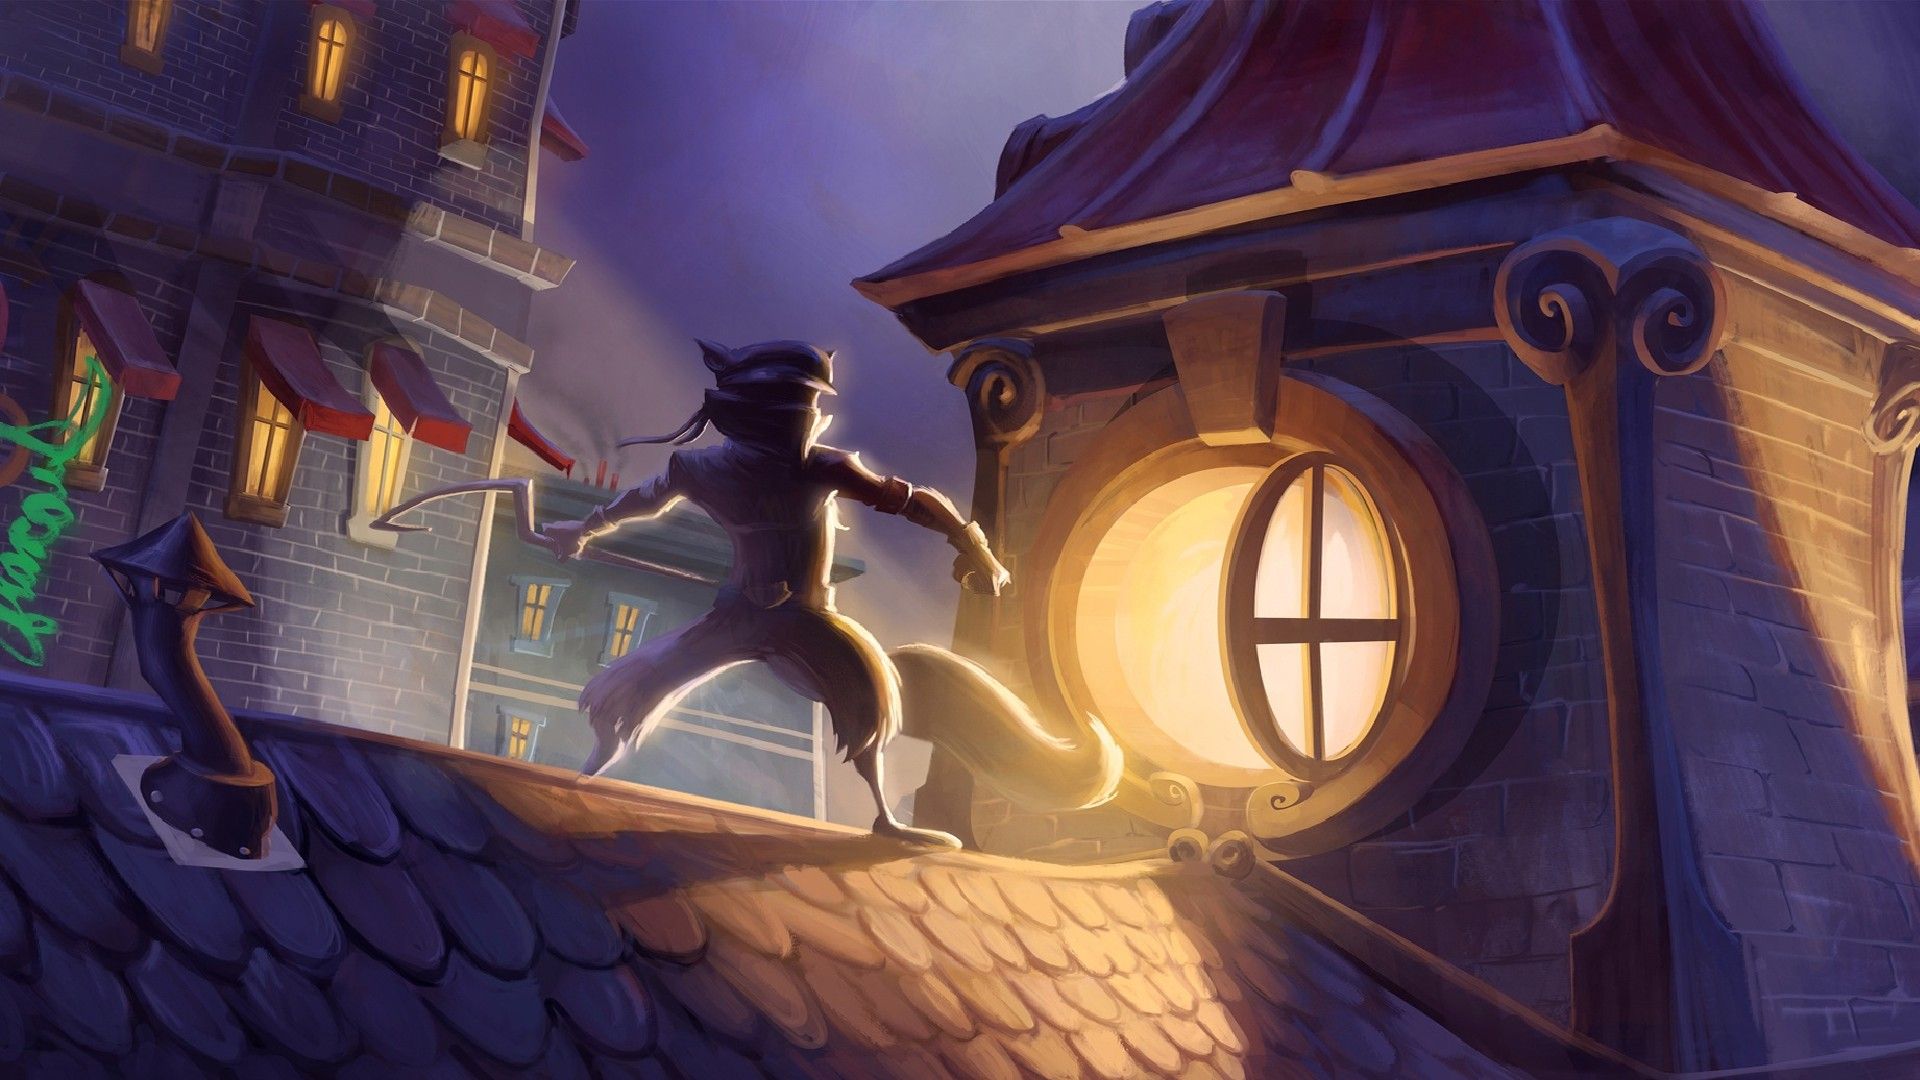 Sly-Cooper-Thieves-in-Time-Problems-Sly-5-Rumor